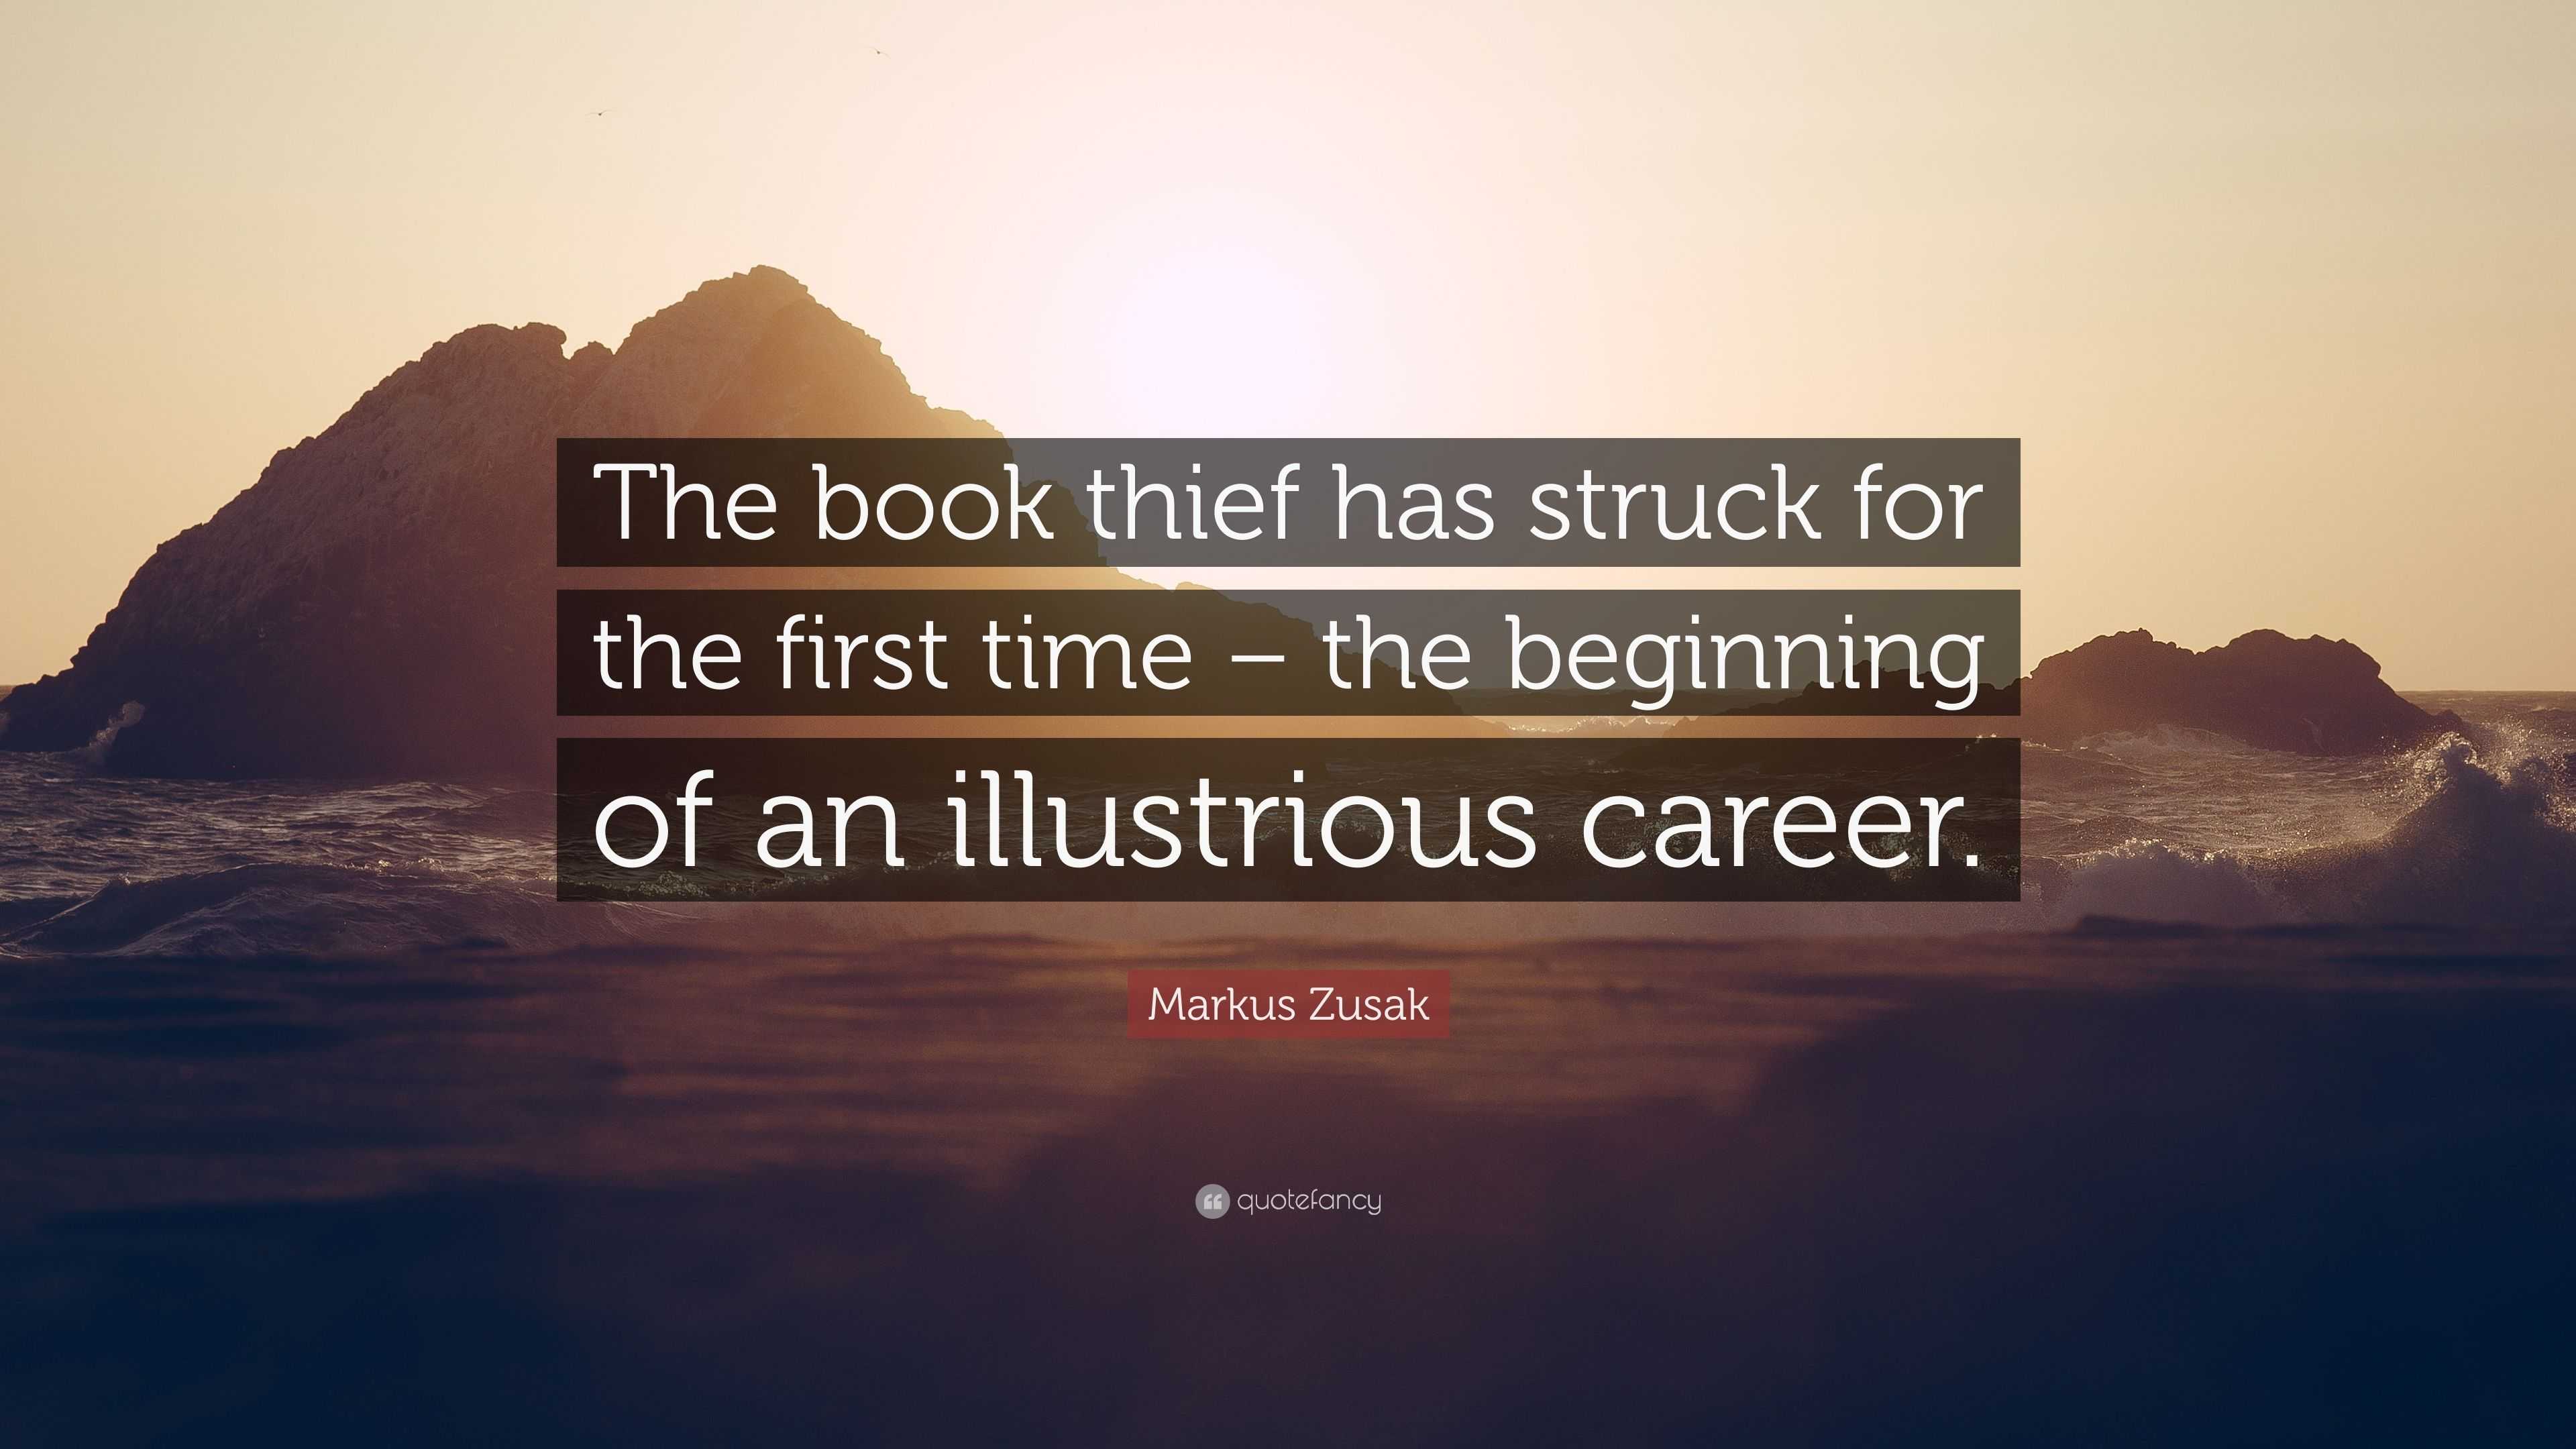 Markus Zusak Quote: “The book thief has struck for the first time – the  beginning of an